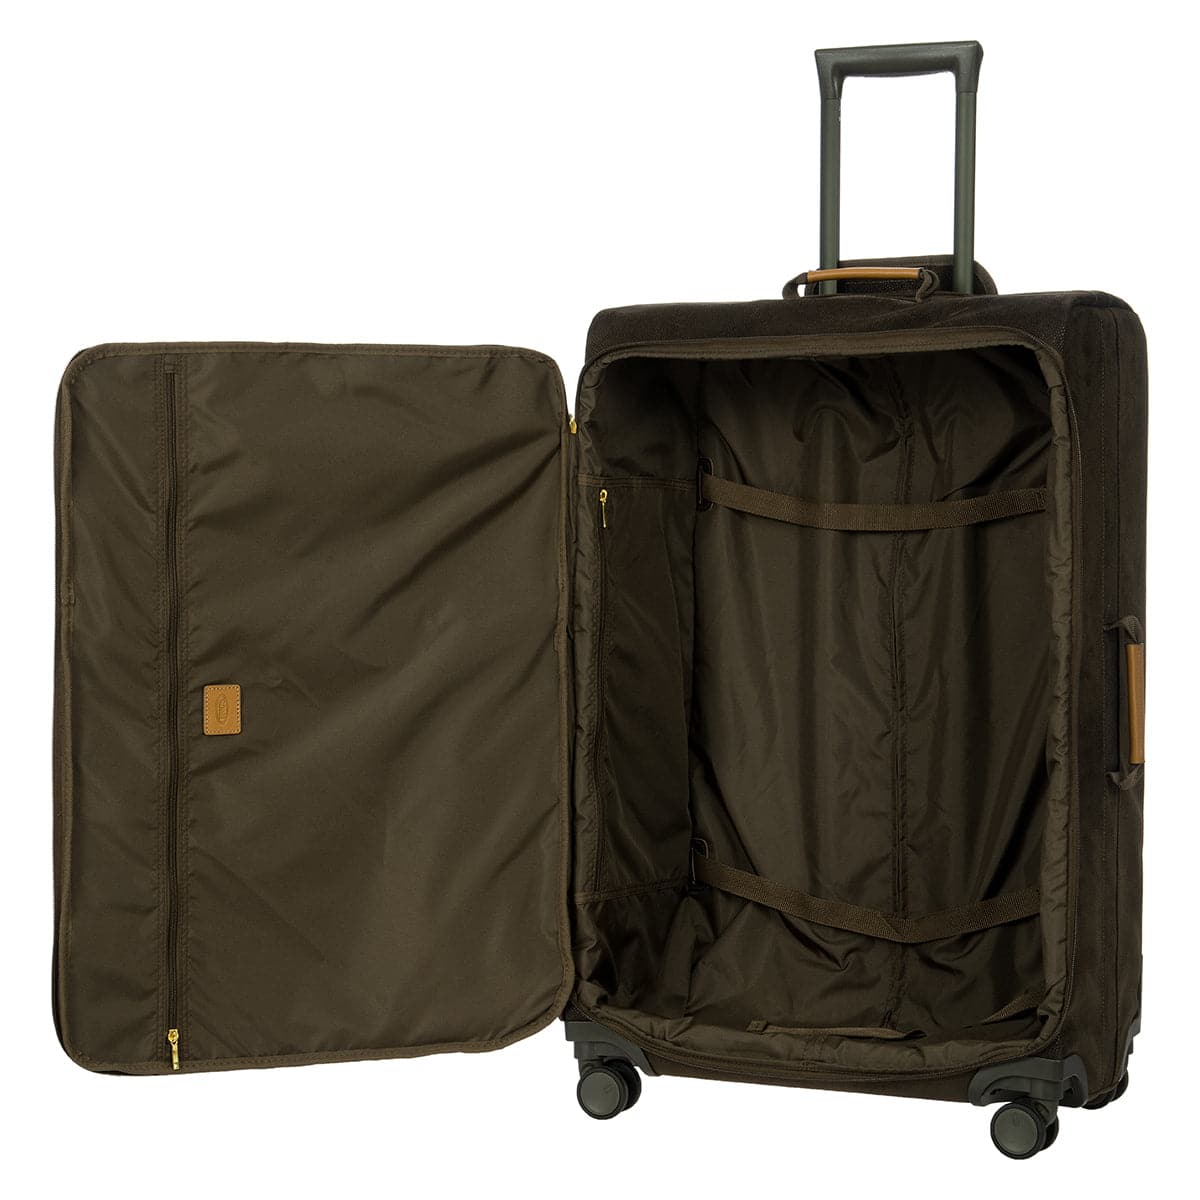 Bric's Life New Tropea 30" Spinner Luggage